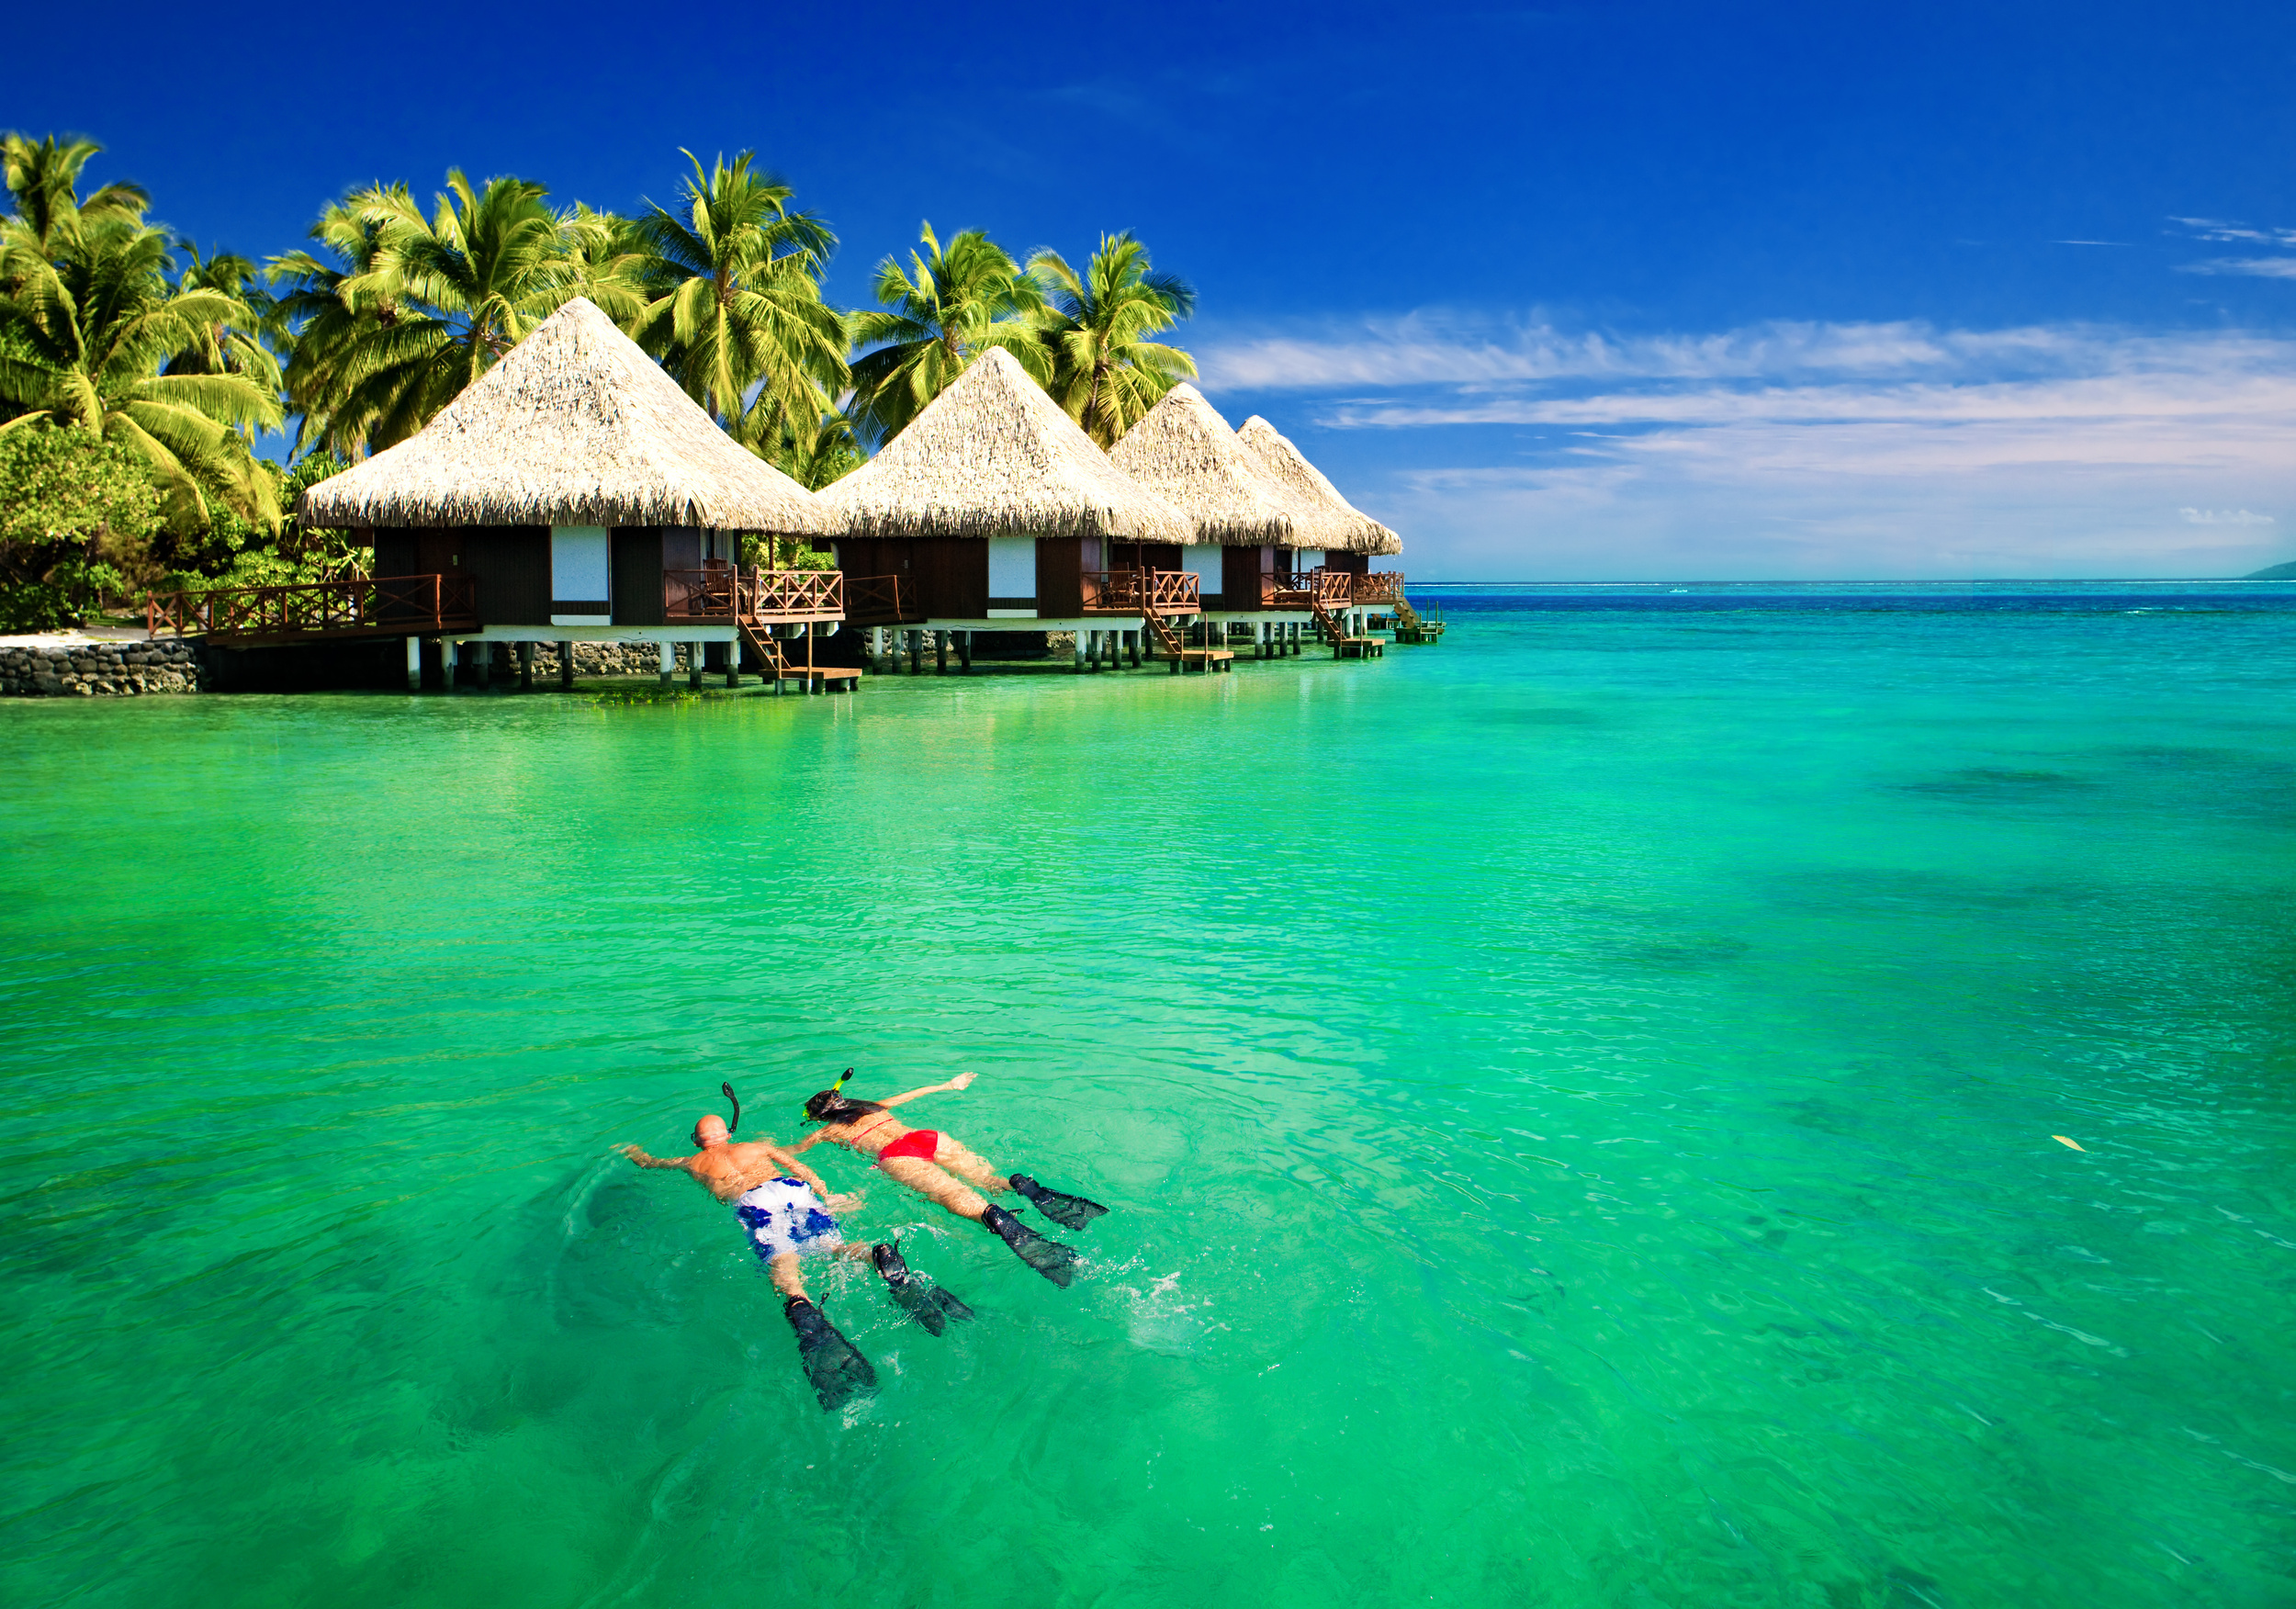 <p>Overwater hotels were popularized in Bora Bora, and who wouldn’t want a unique accommodation to share with their partner? Enjoy turquoise waters and private villas in a tropical paradise perfect for a getaway.</p><p><a href='https://www.msn.com/en-us/community/channel/vid-cj9pqbr0vn9in2b6ddcd8sfgpfq6x6utp44fssrv6mc2gtybw0us'>Follow us on MSN to see more of our exclusive lifestyle content.</a></p>